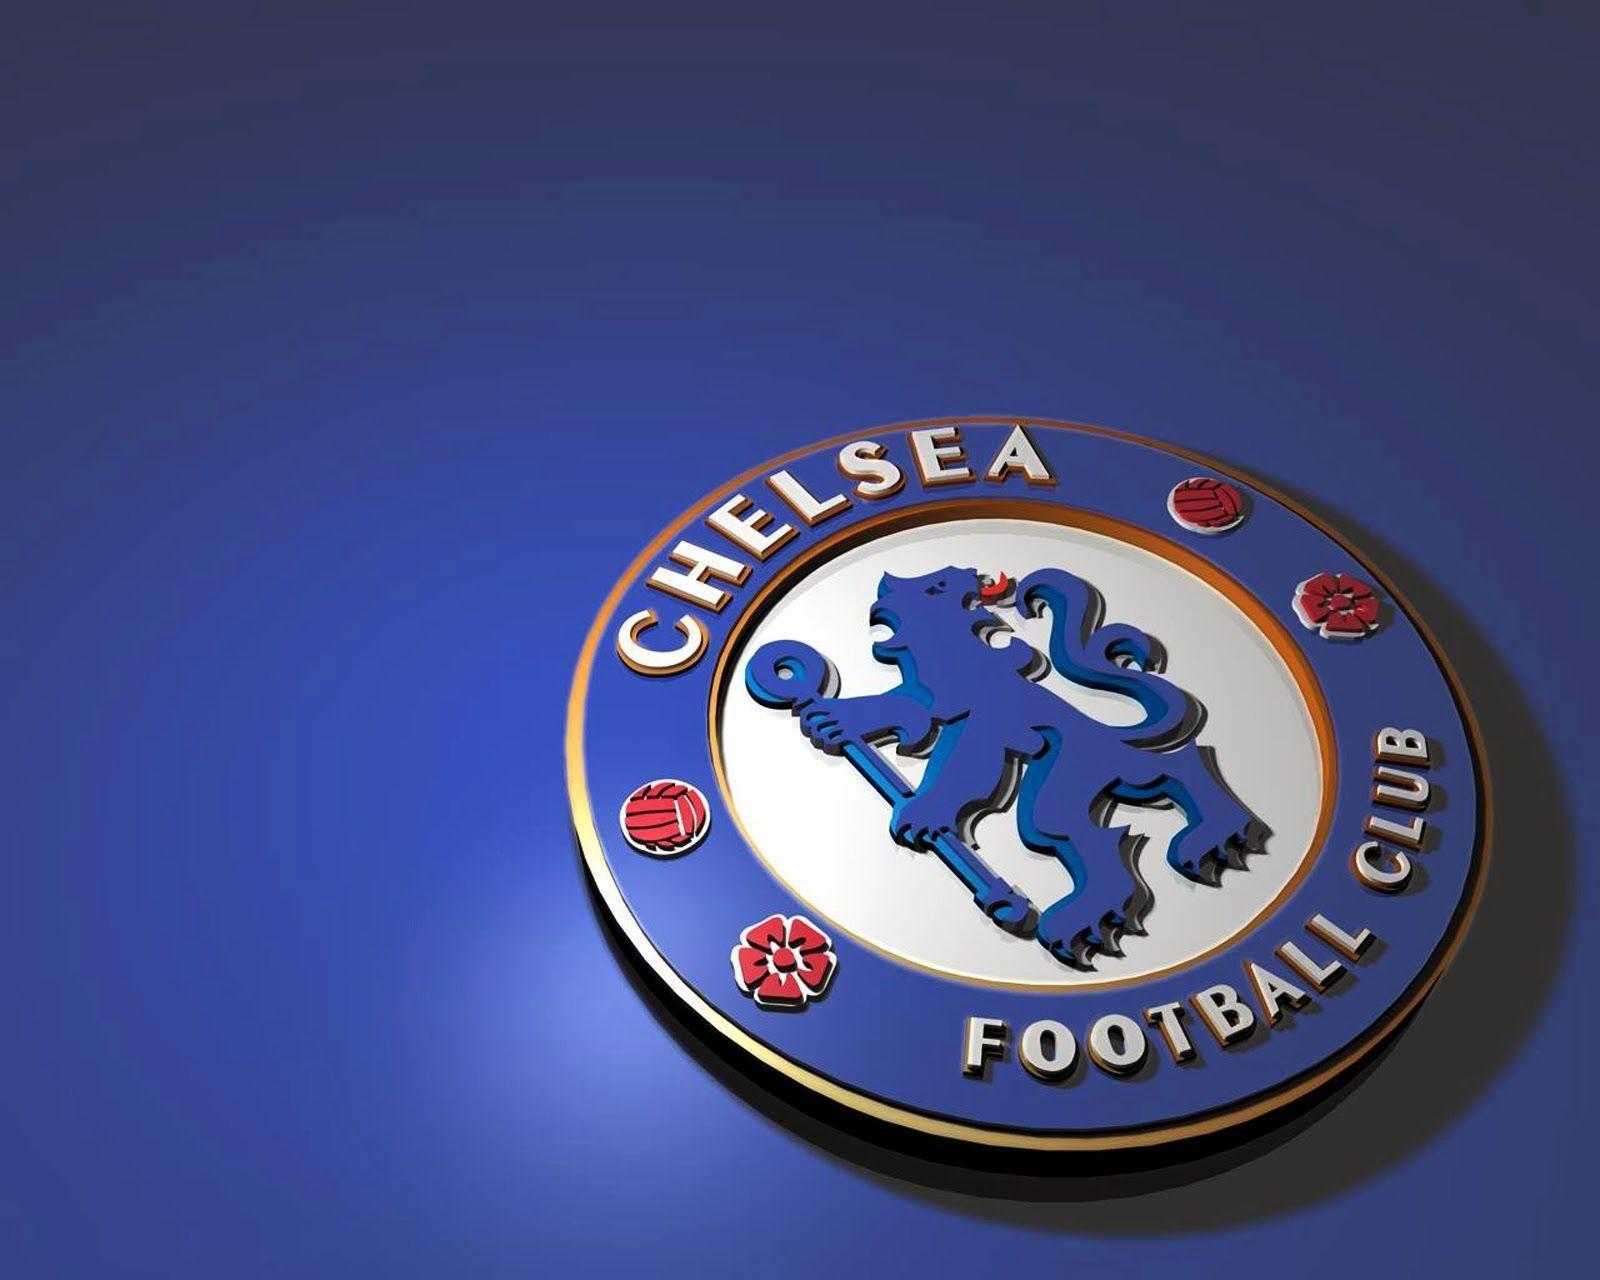 image For > Chelsea Fc Wallpaper HD 2014